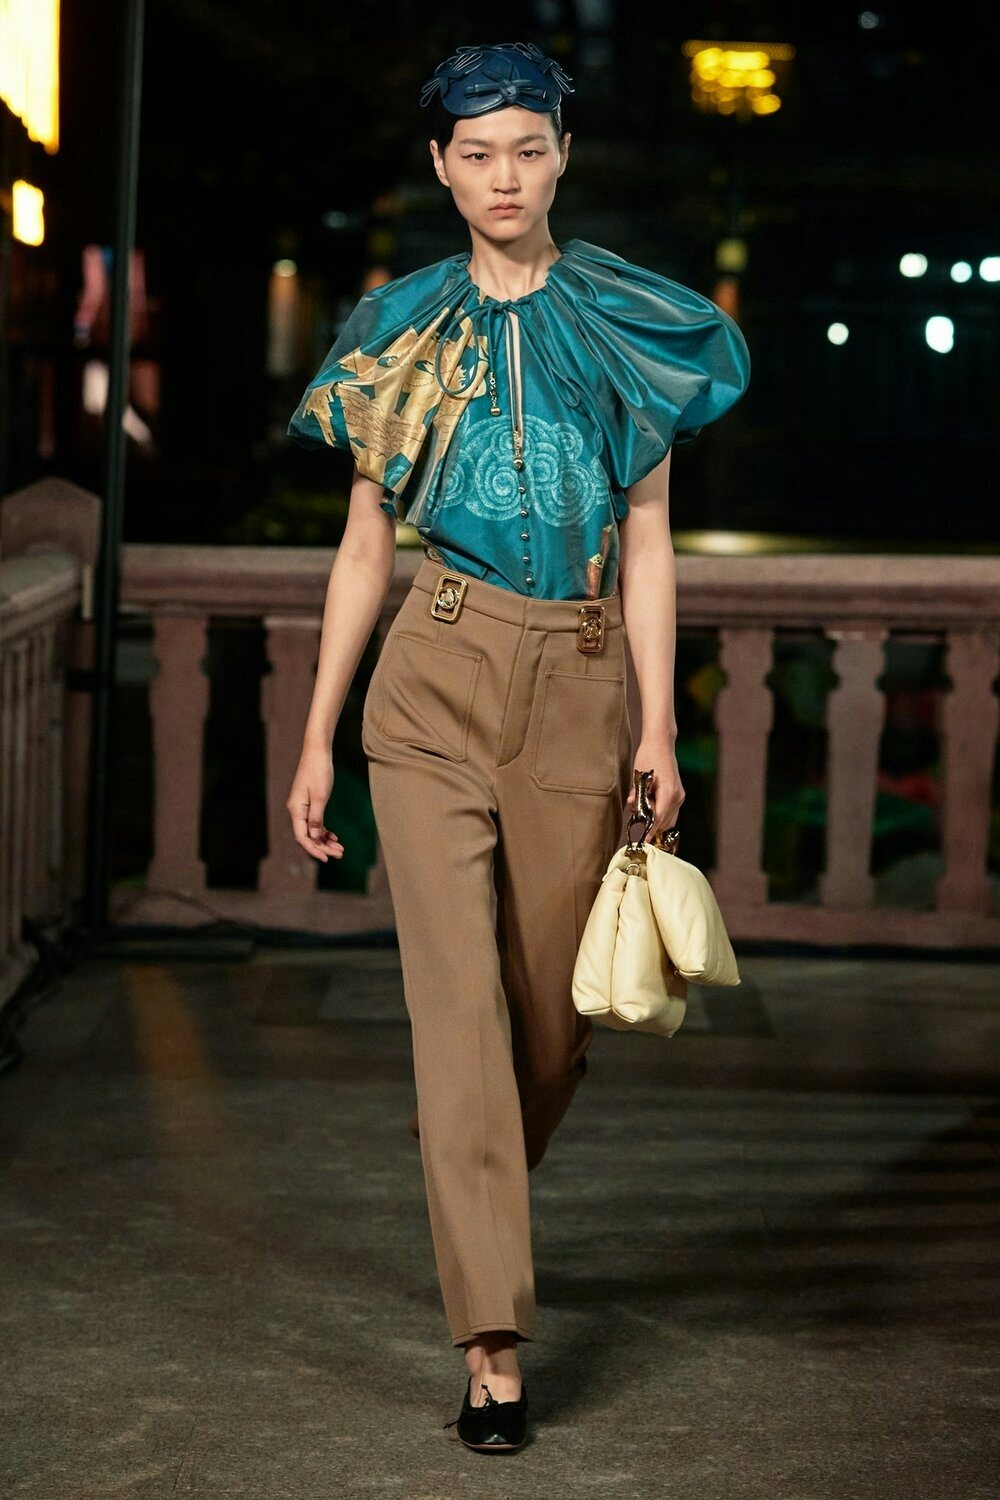 A look from Lanvin’s S/S 2021 show in Shanghai